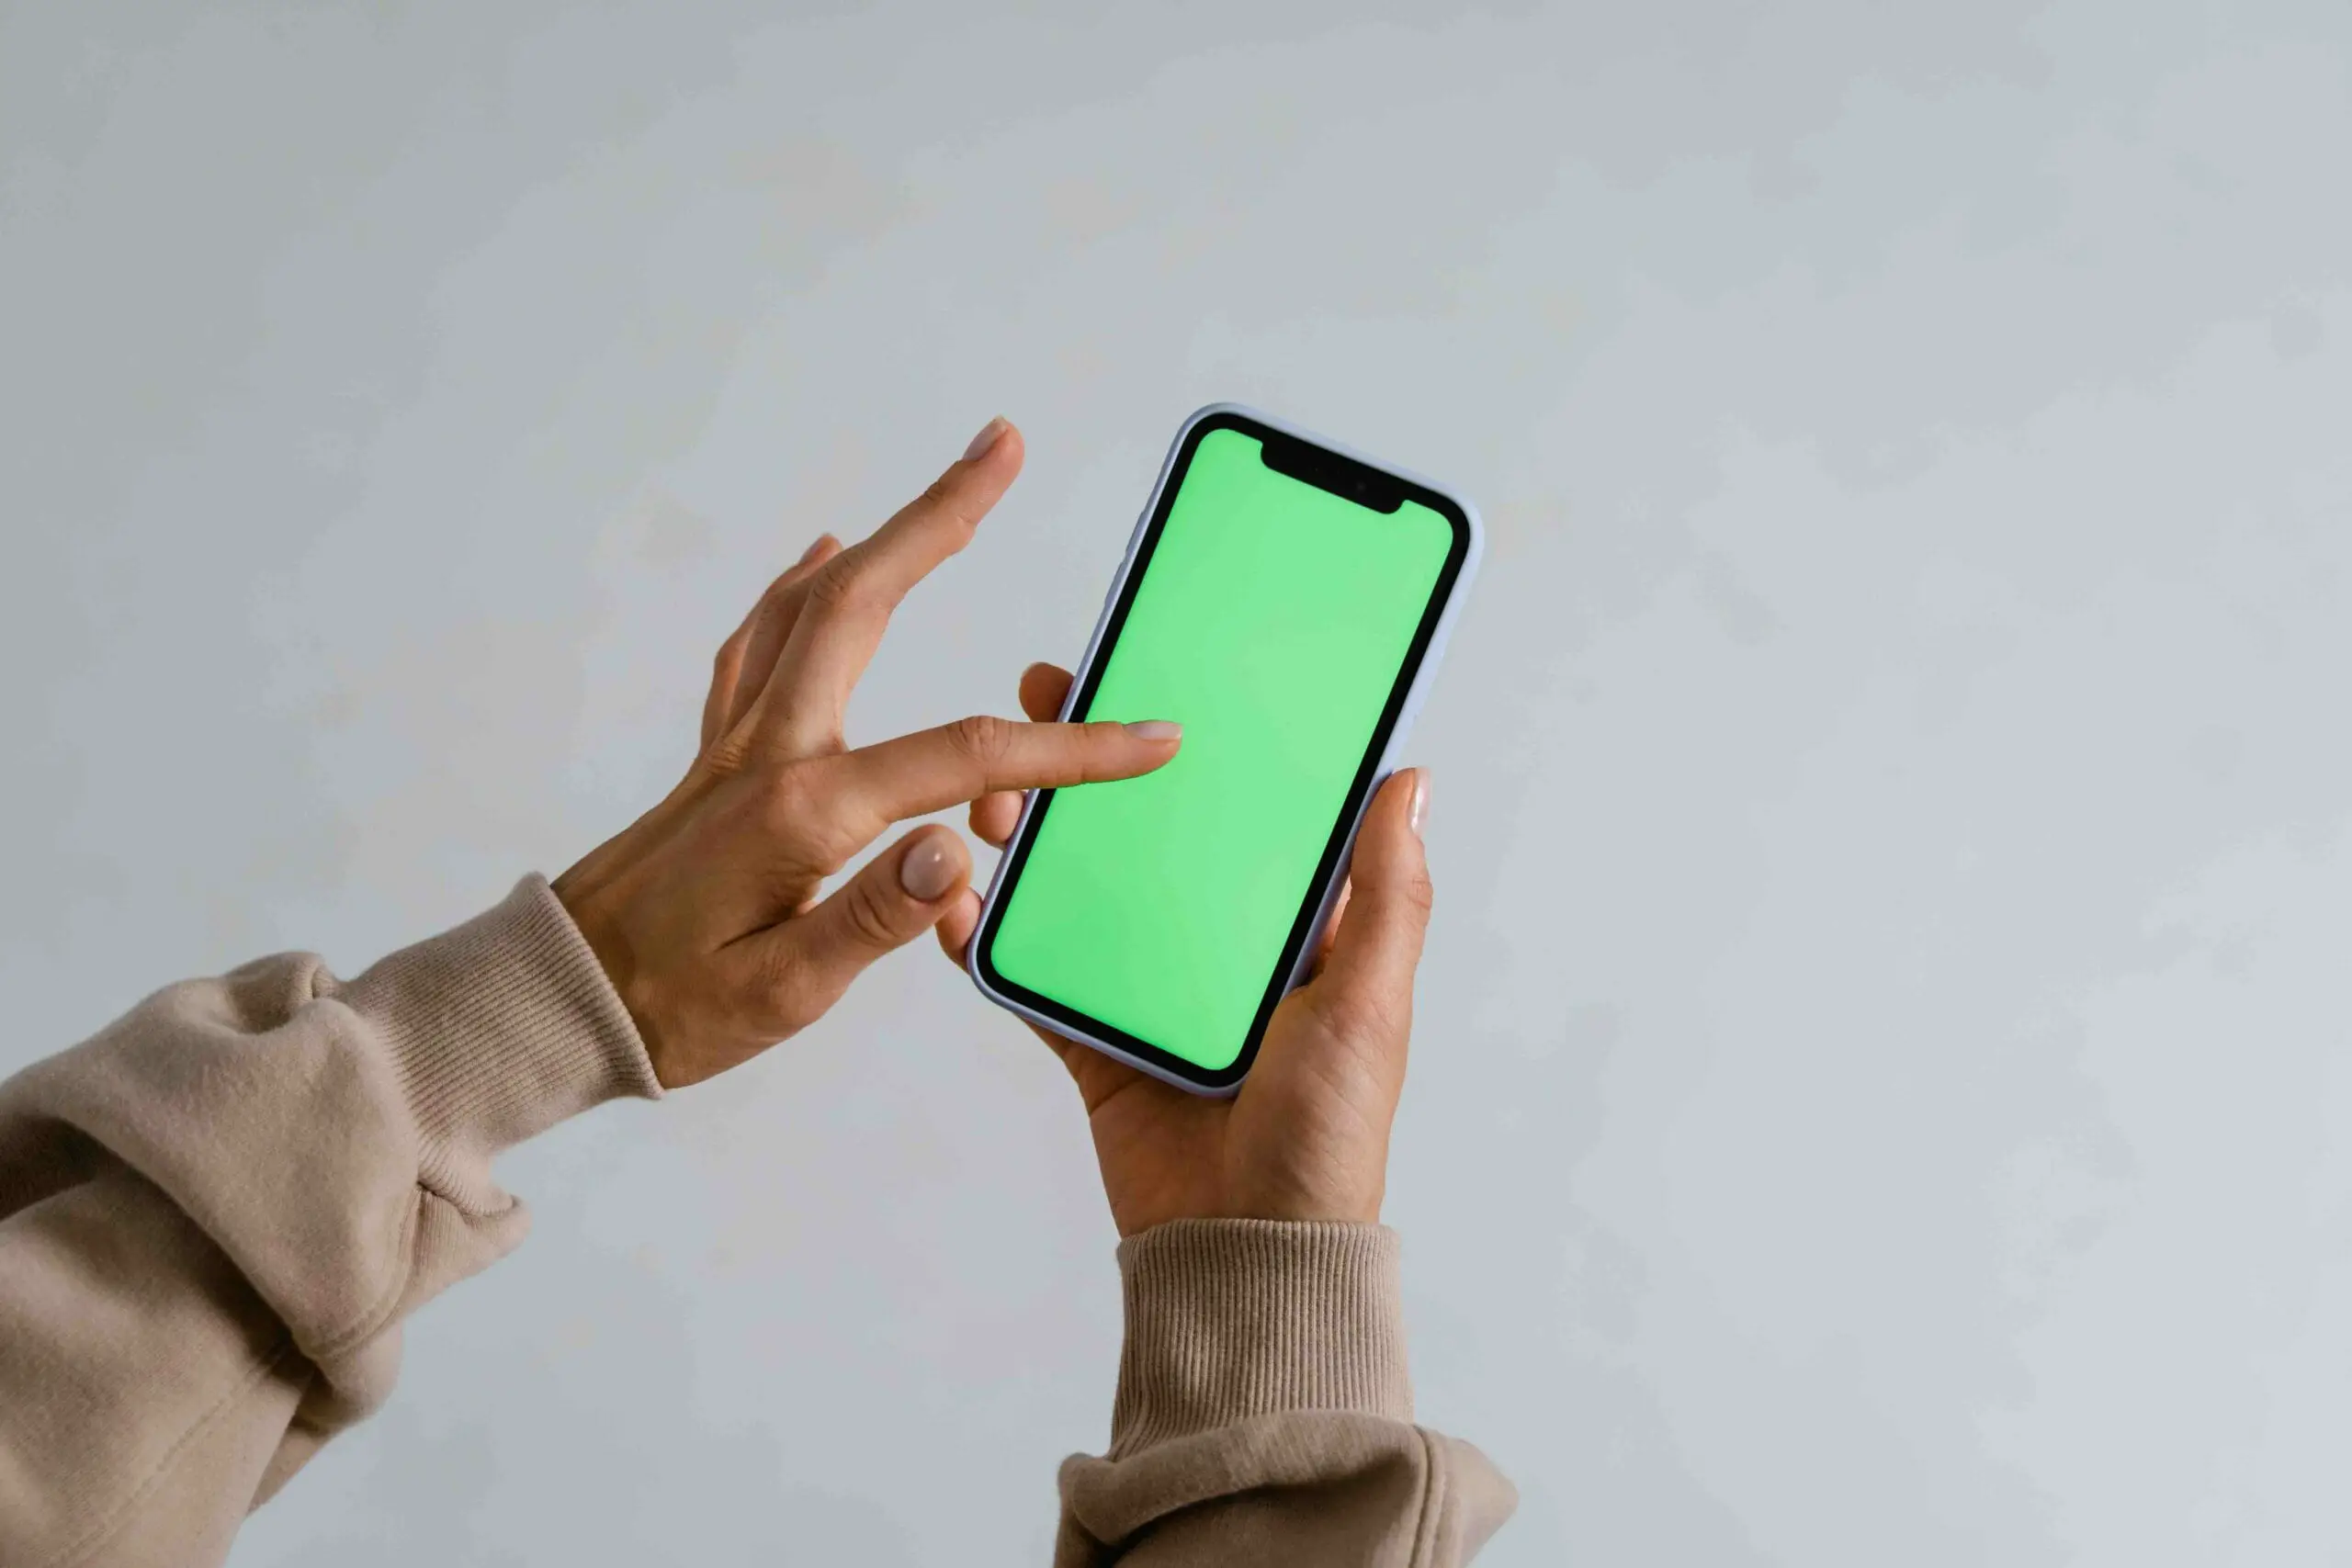 A woman holding a phone showing the green screen in it